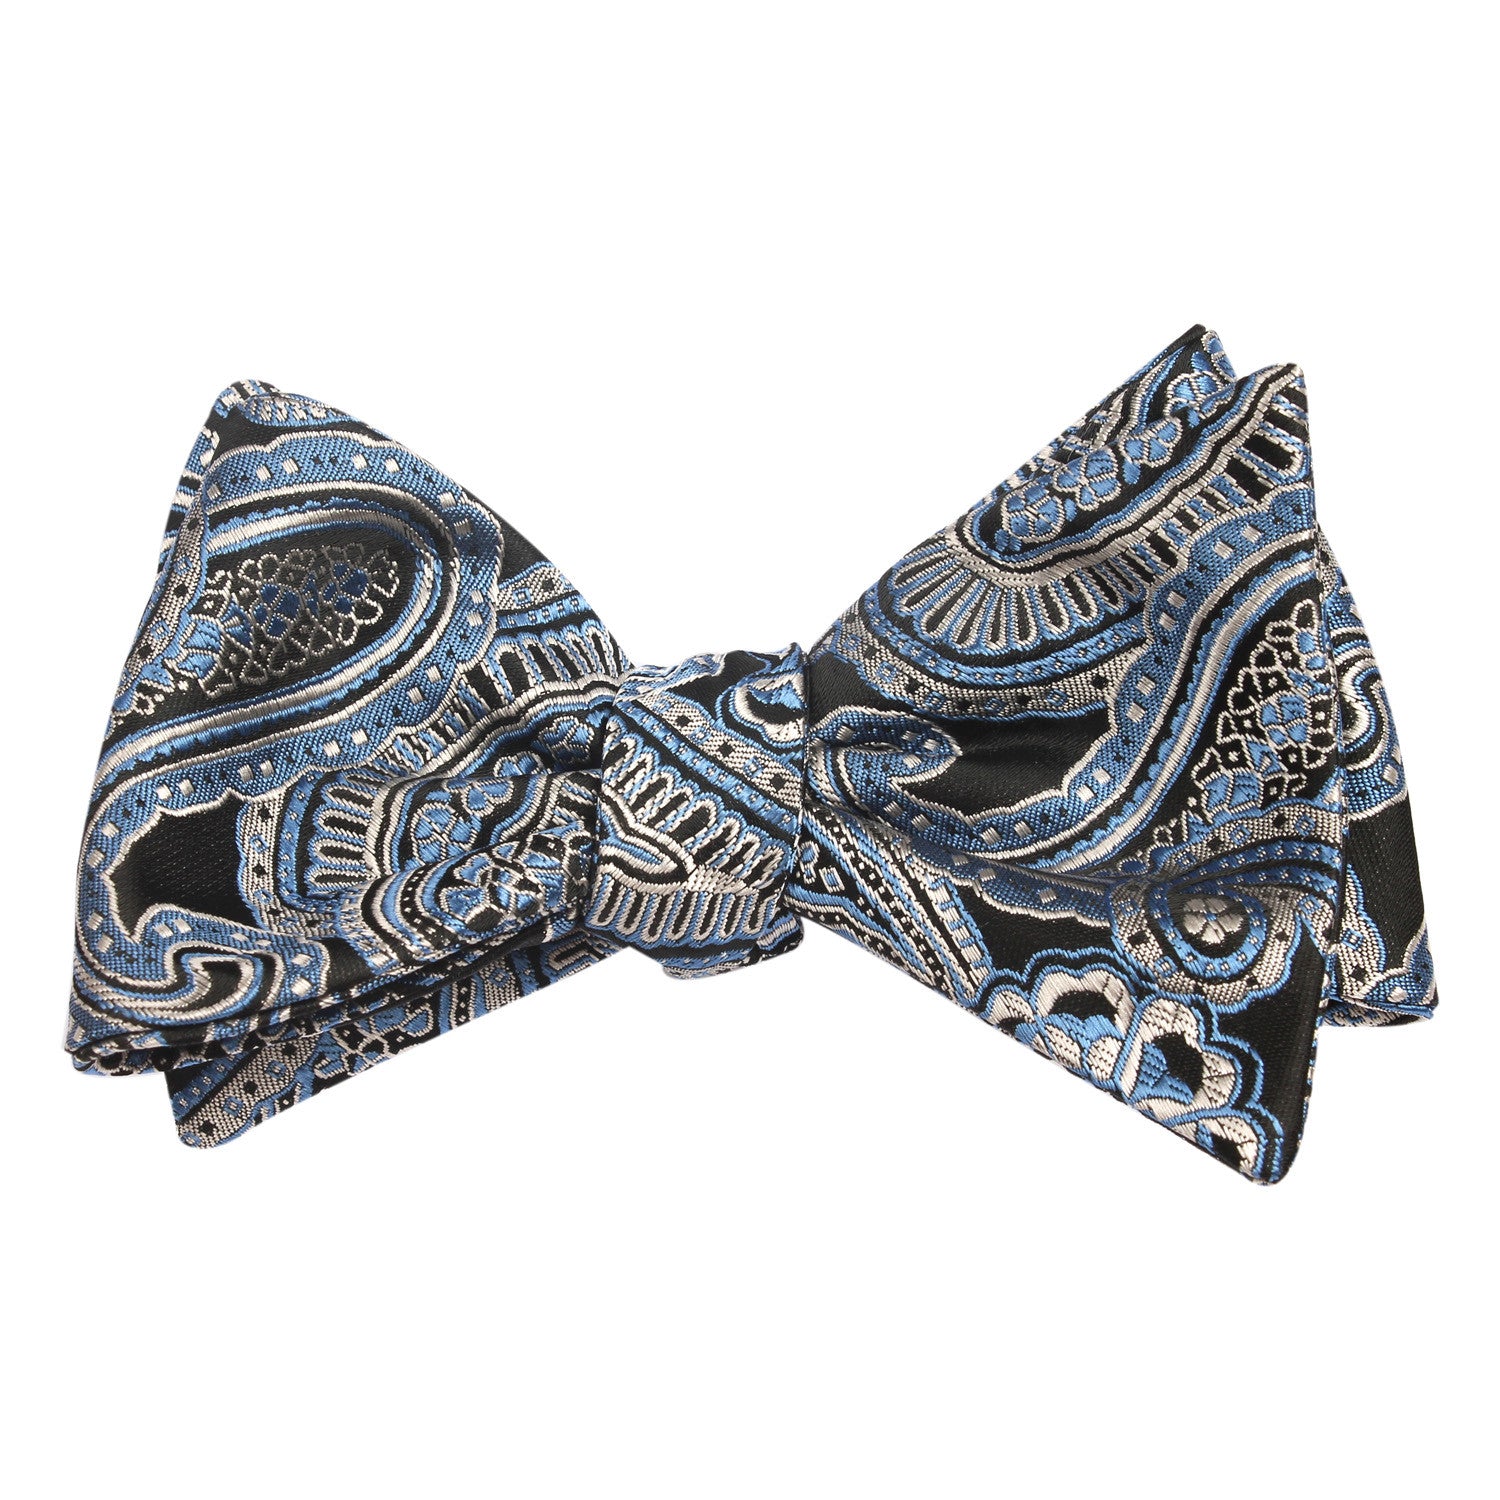 Paisley Blue - Bow Tie (Untied) Self tied knot by OTAA